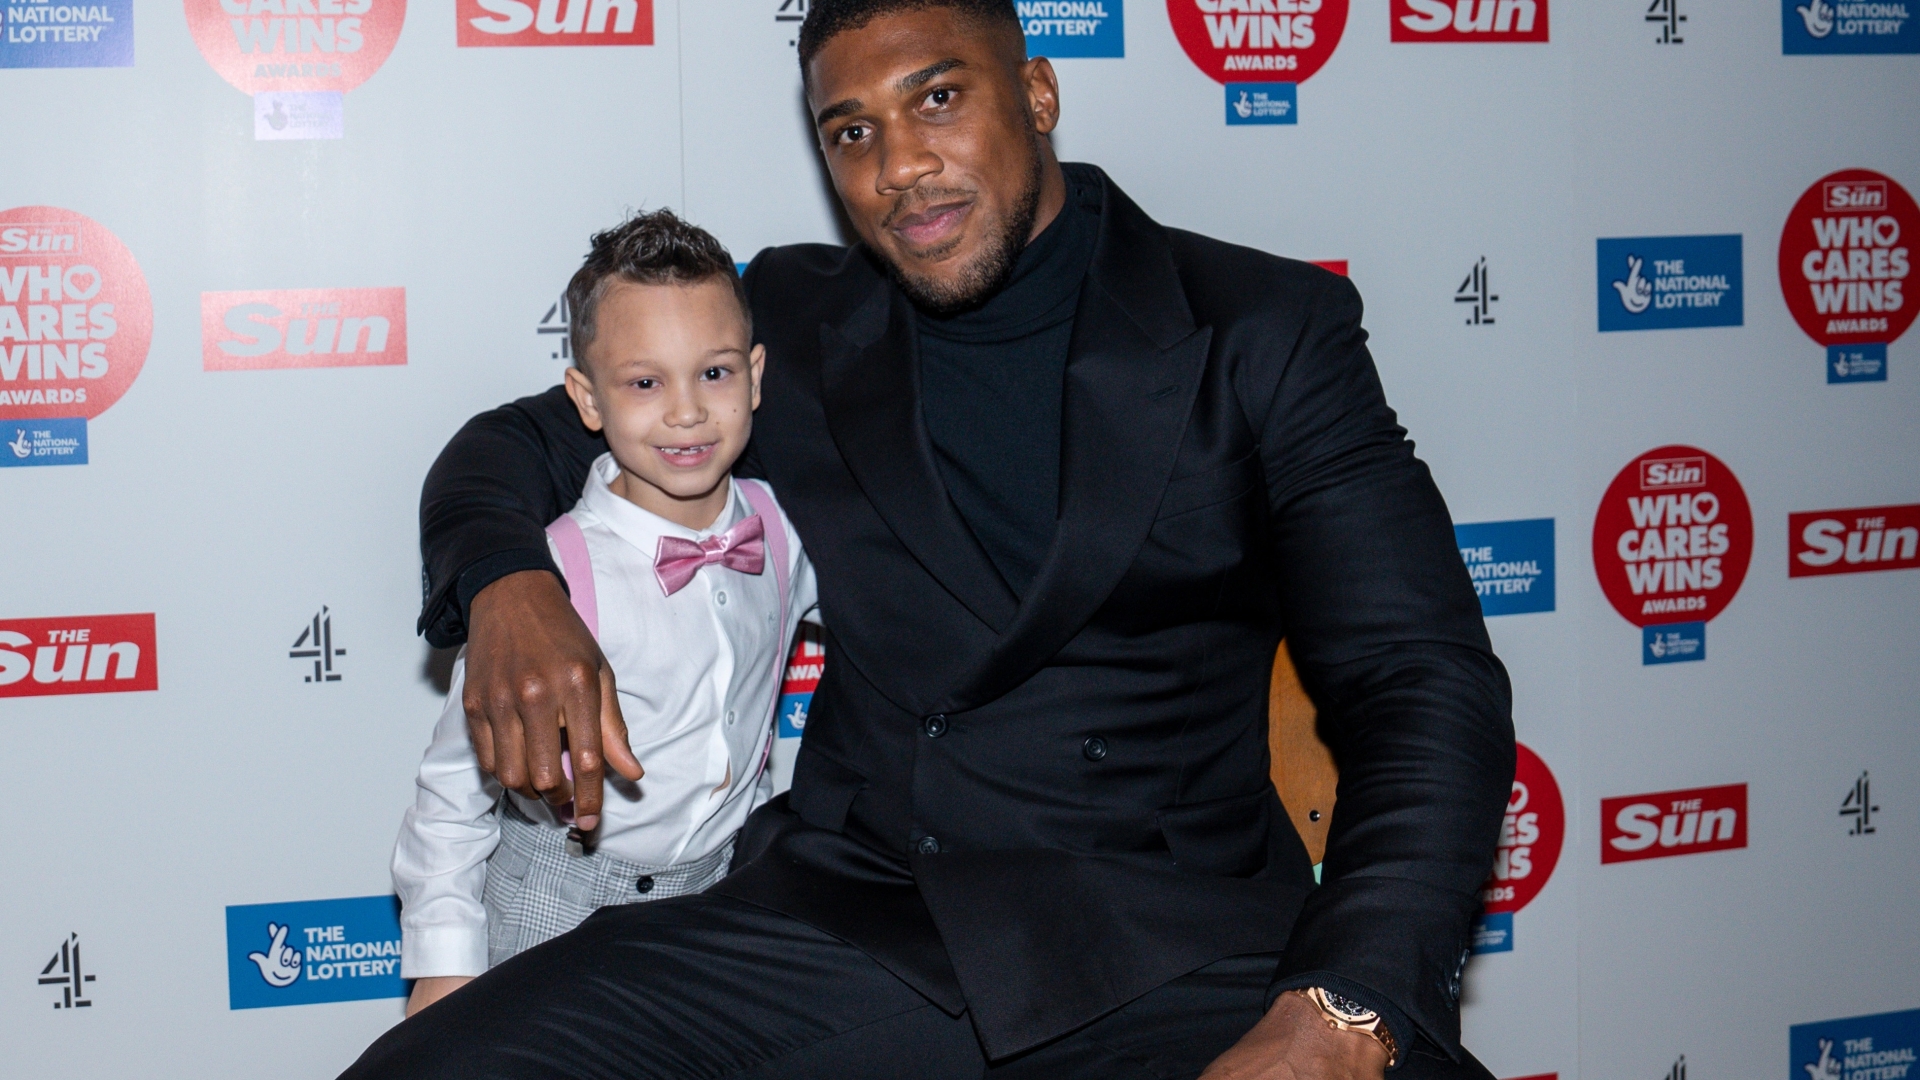 Anthony Joshua hails health heroes as his inspiration and believes they make him a better person.